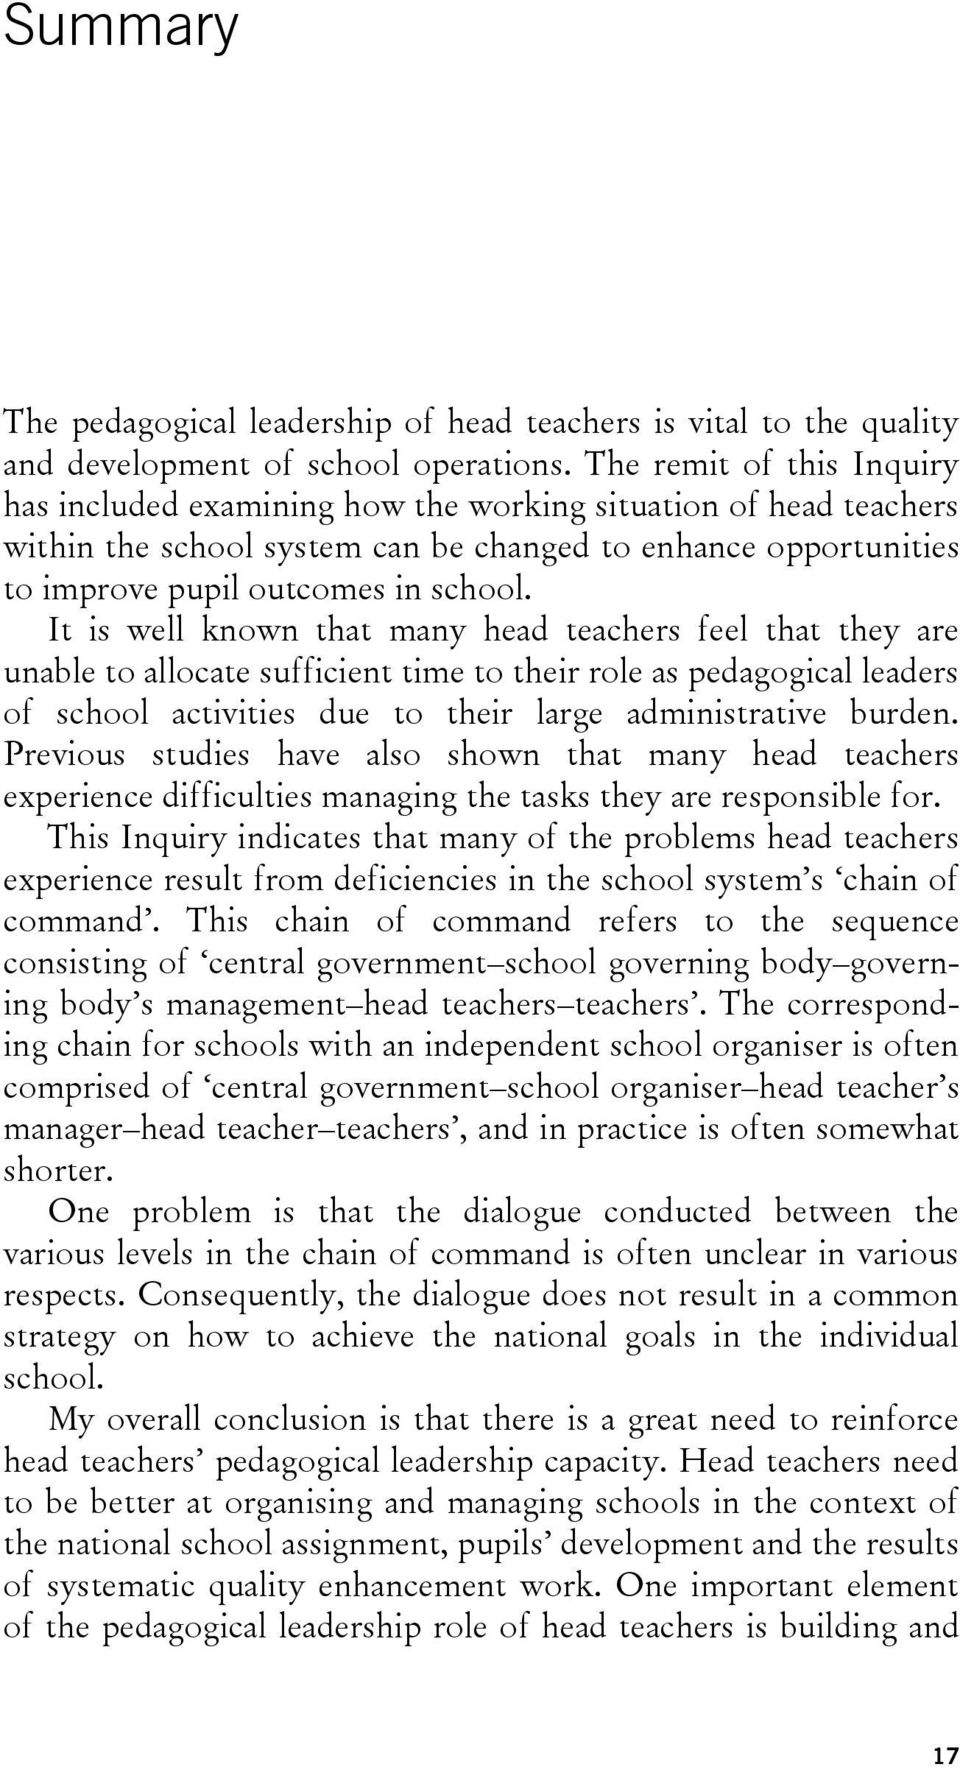 It is well known that many head teachers feel that they are unable to allocate sufficient time to their role as pedagogical leaders of school activities due to their large administrative burden.